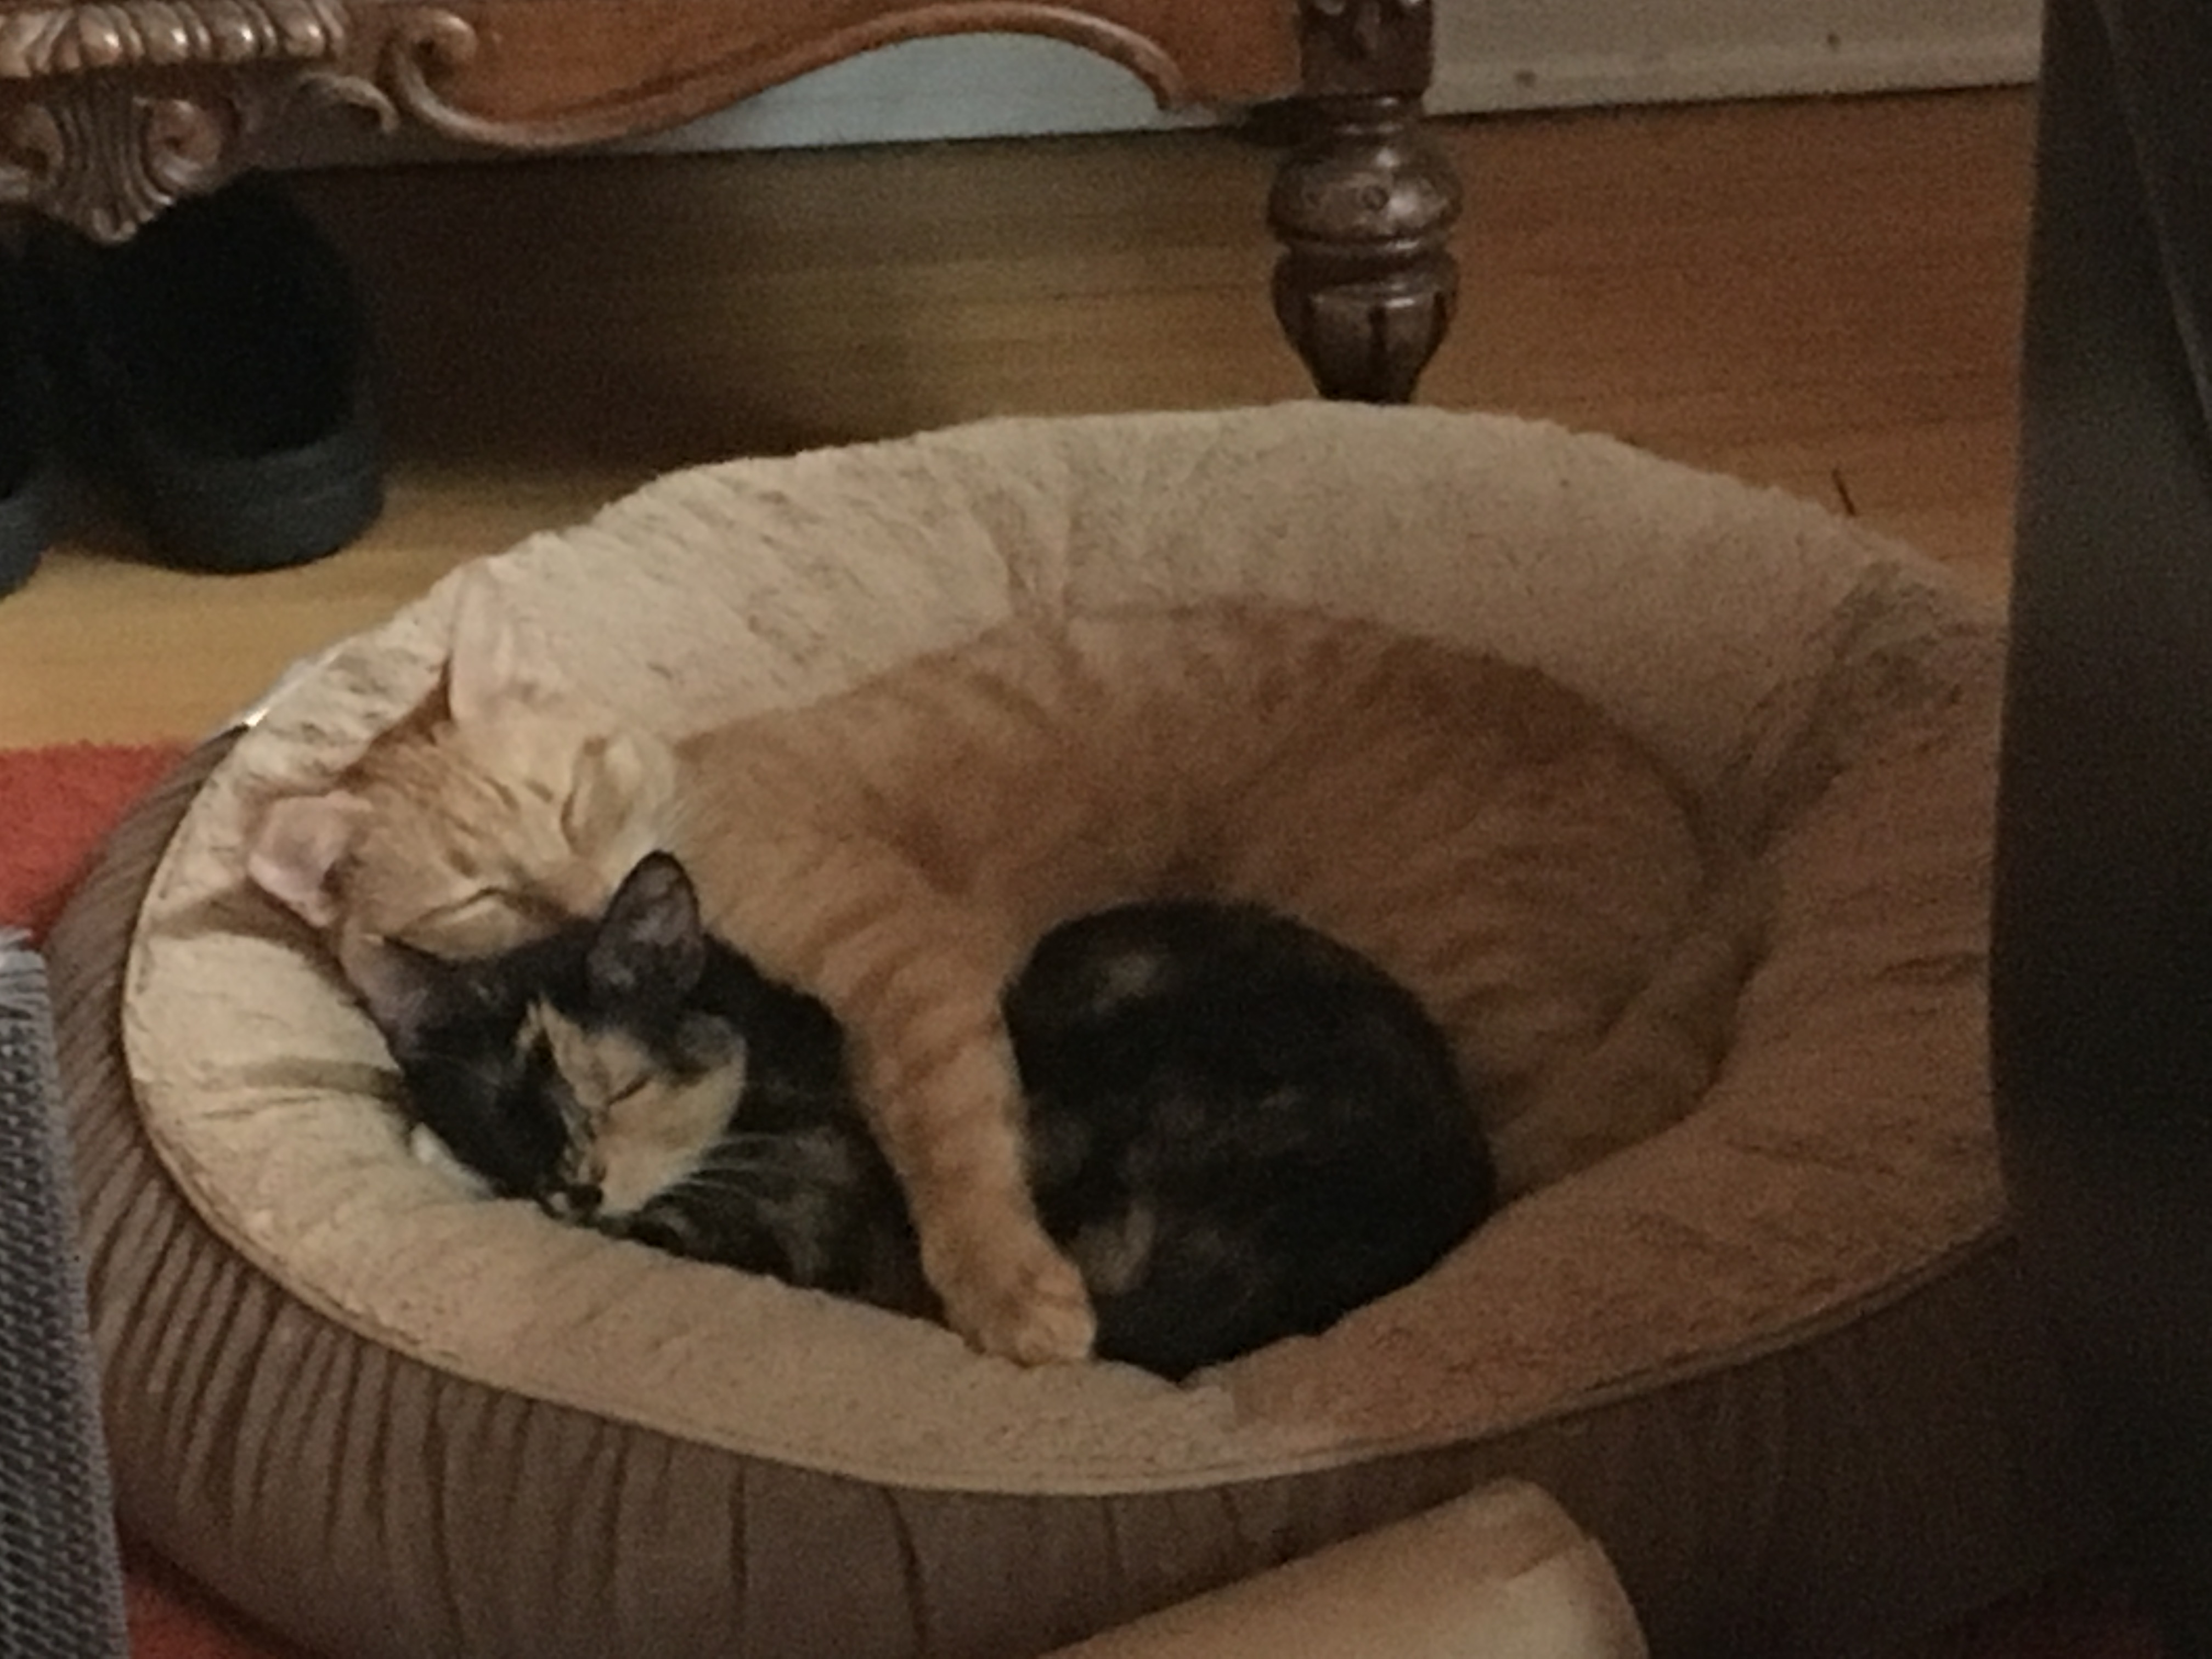 two cats sleeping on a cat bed - a tabby cat is curled around and hugging a smaller tortoise shell patterned cat.